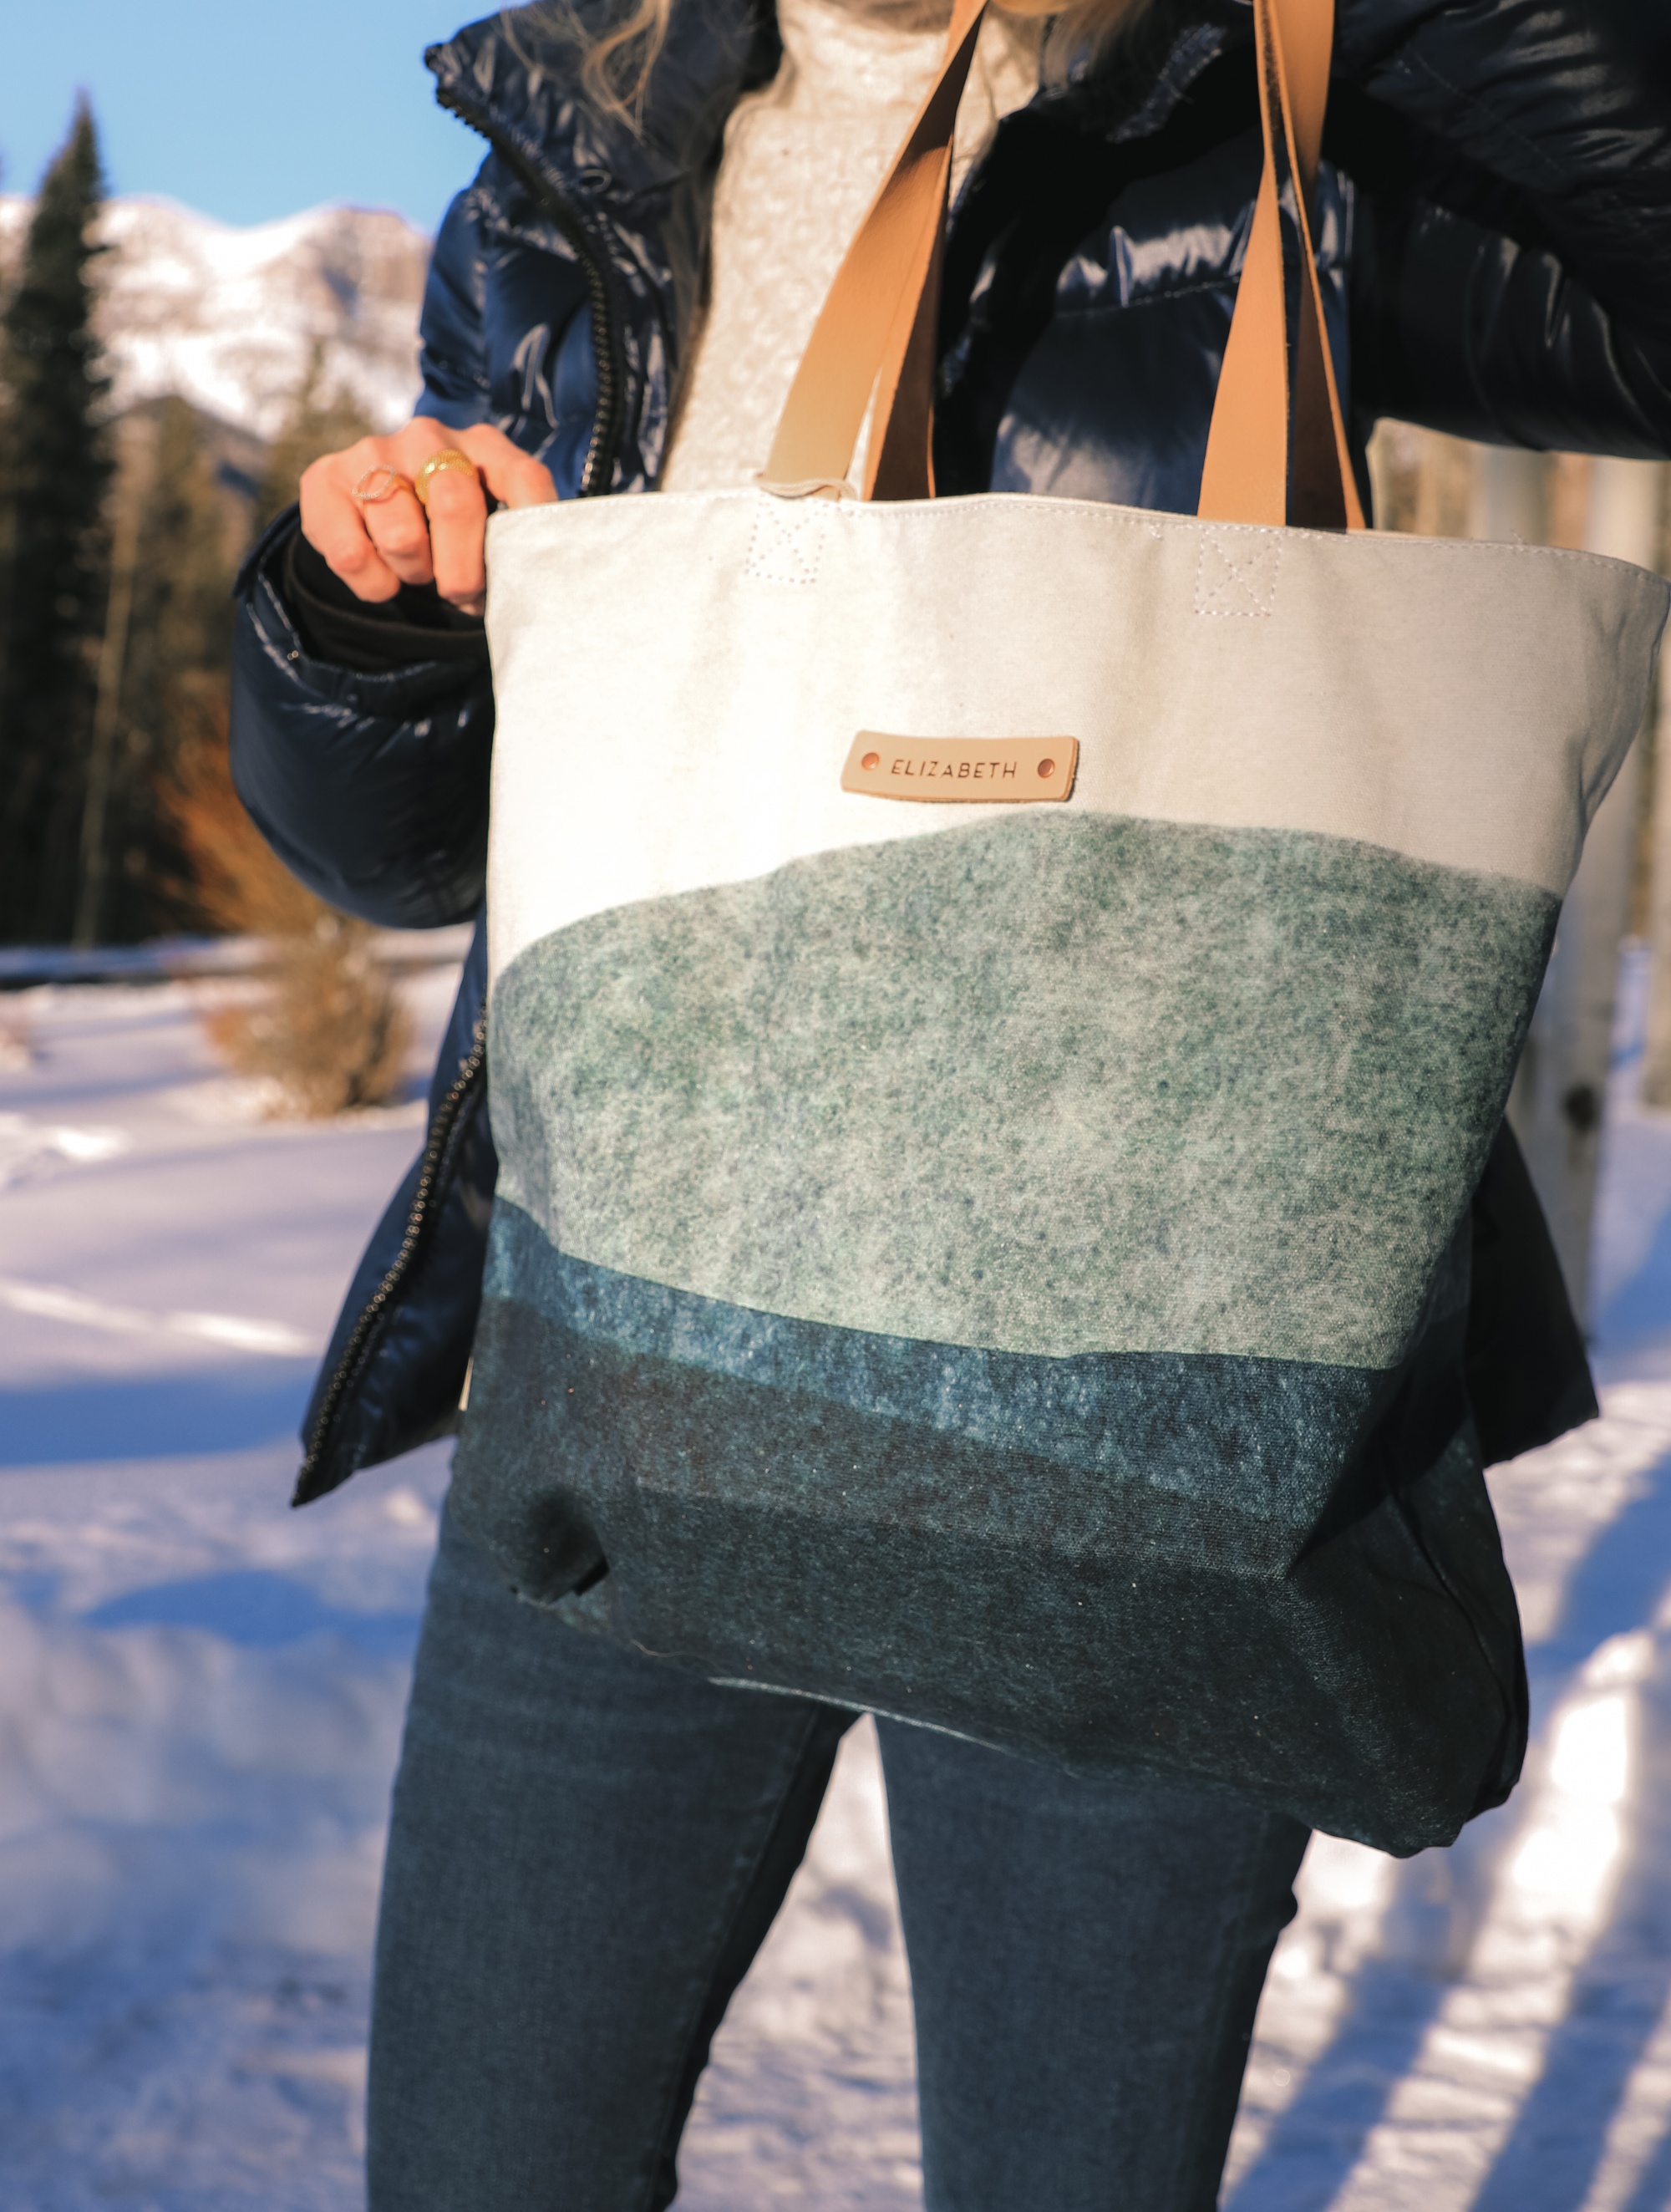 Personalized Gifts, Erin Busbee of Busbee Style carrying a blue and white personalized tote bag from Minted wearing a SAM. puffer jacket with a cable knit sweater and jeans in Telluride, Colorado